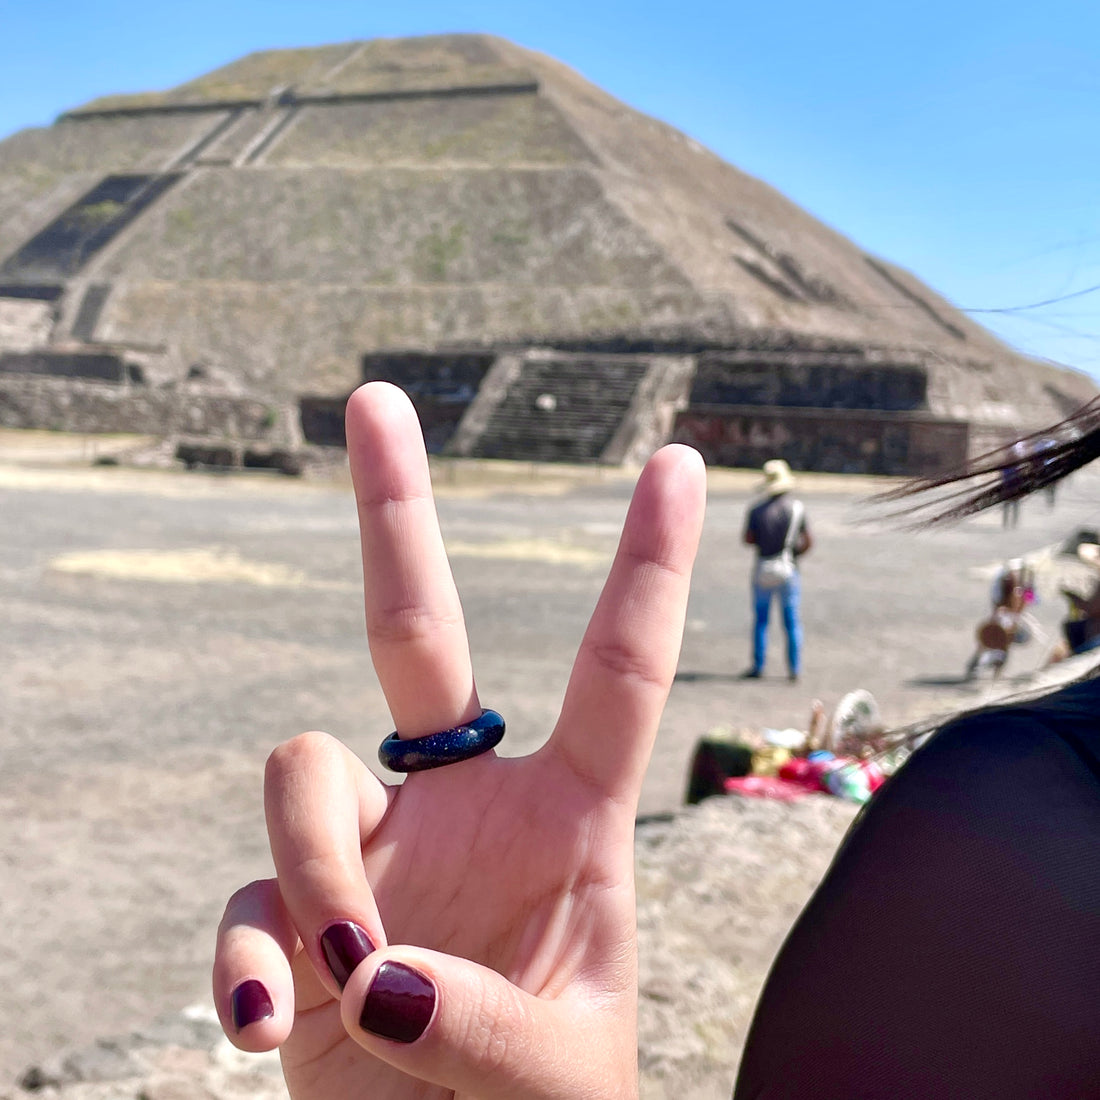 woman making a peace sign with fingers while wearing stone ring on finger posing at the Teotihuacan ruins in Mexico